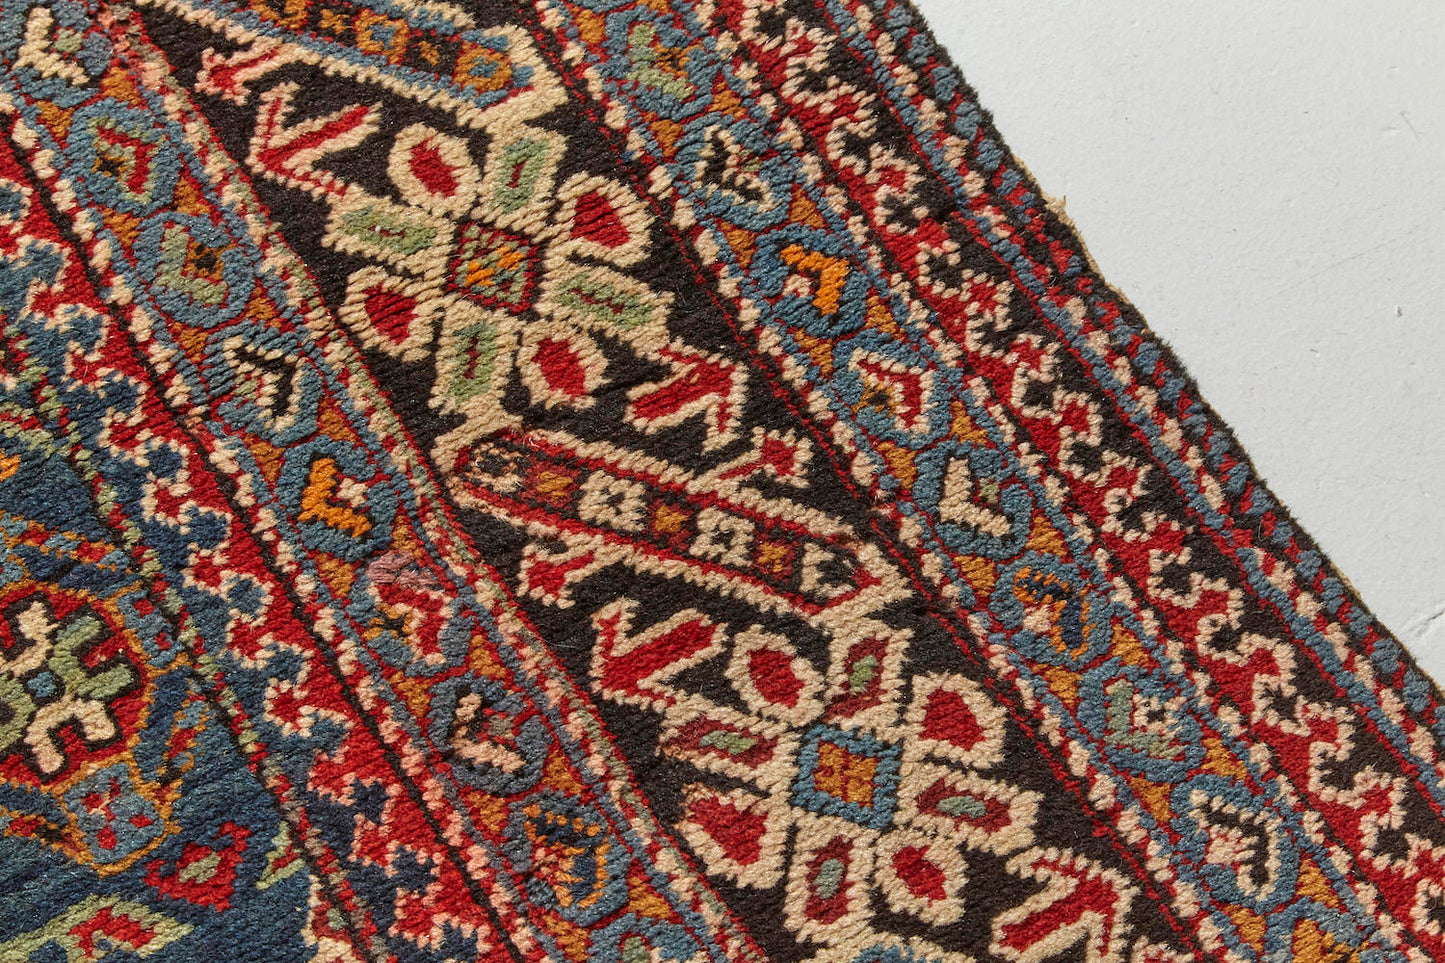 Border detail from Chi chi antique Persian Rug runner with blue, red and cream designs intricately hand woven throughout, perfect for a hallway, living room or study - Available from King Kennedy Rugs Los Angeles